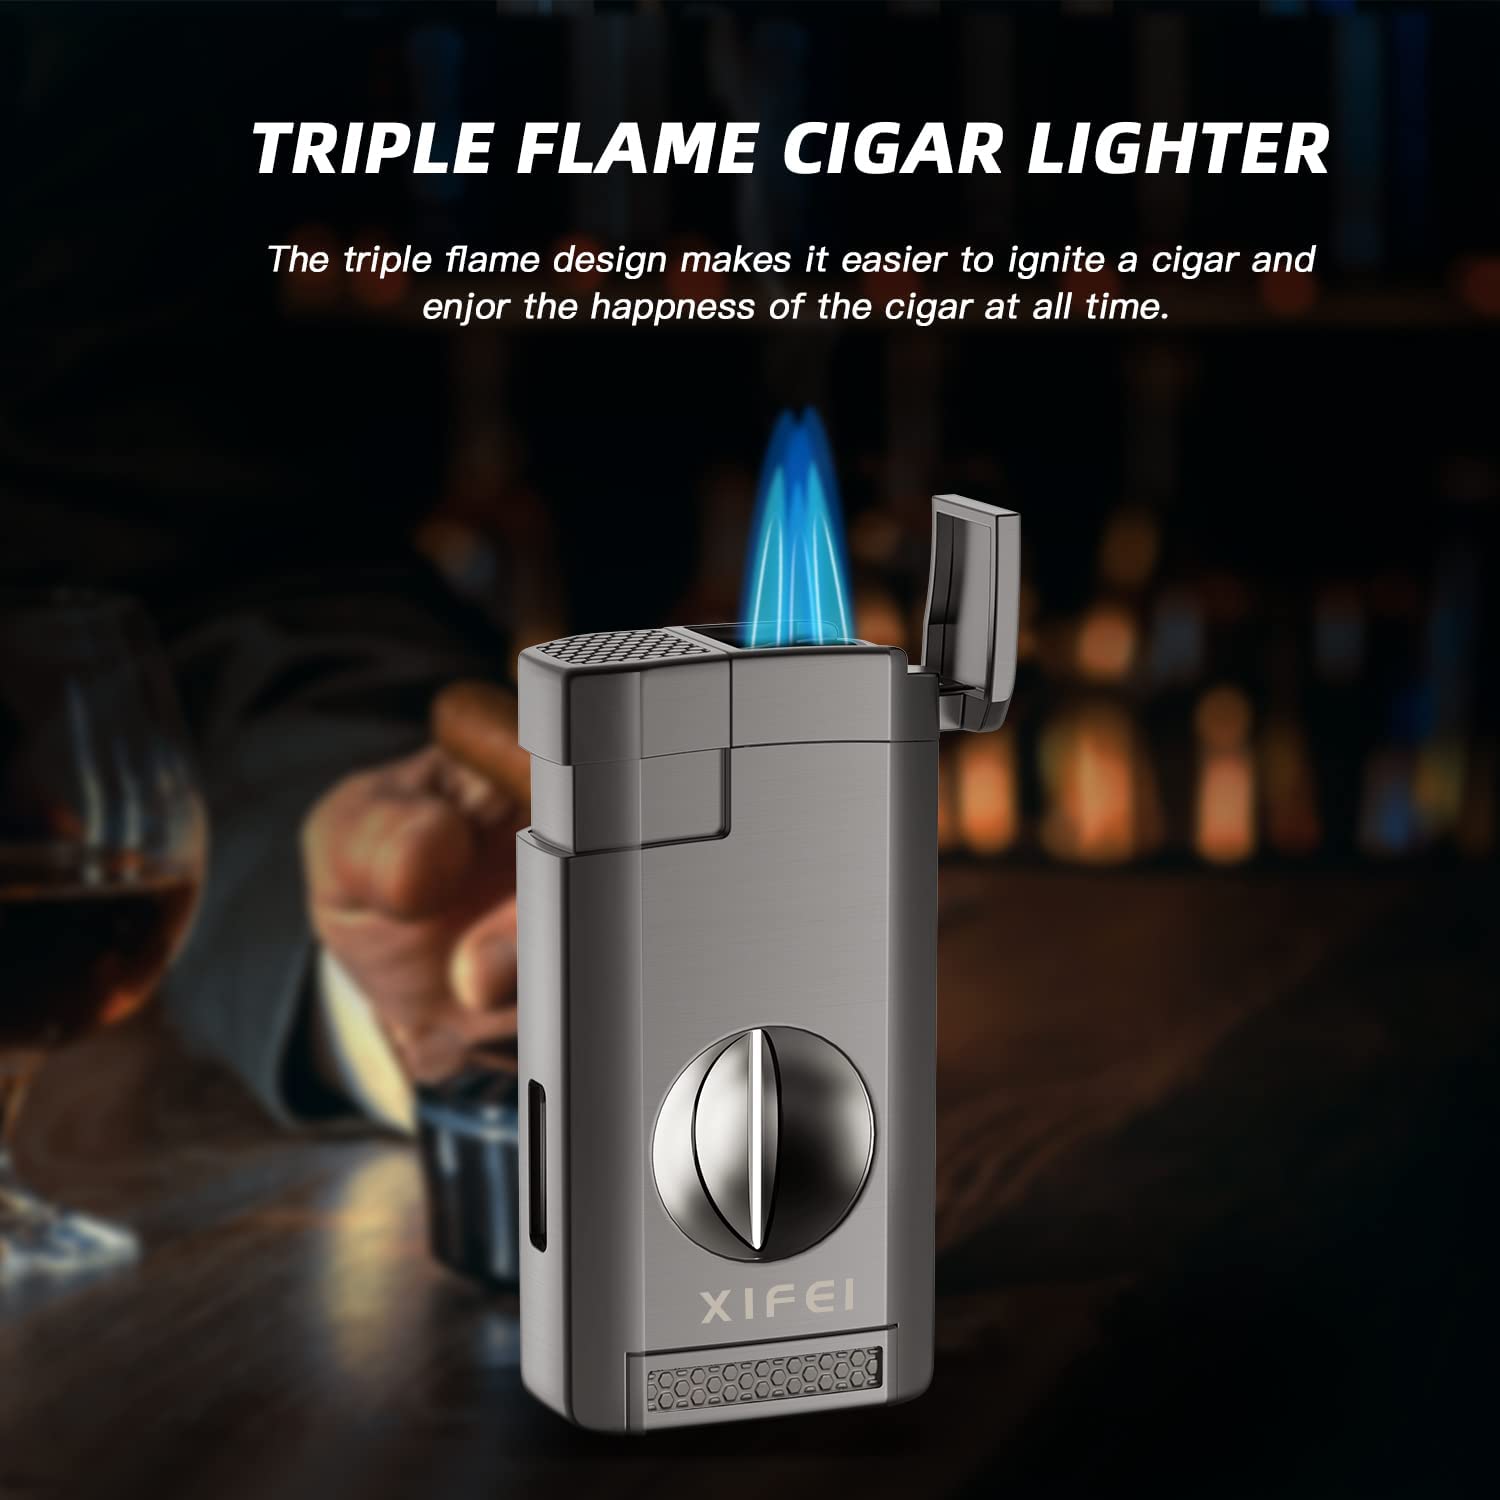 XIFEI Cigar Lighter 4 Jet Flame with Cigar Holder & XIFEI 3 in 1 Straight  Cut V Cutter with Cigar Punch